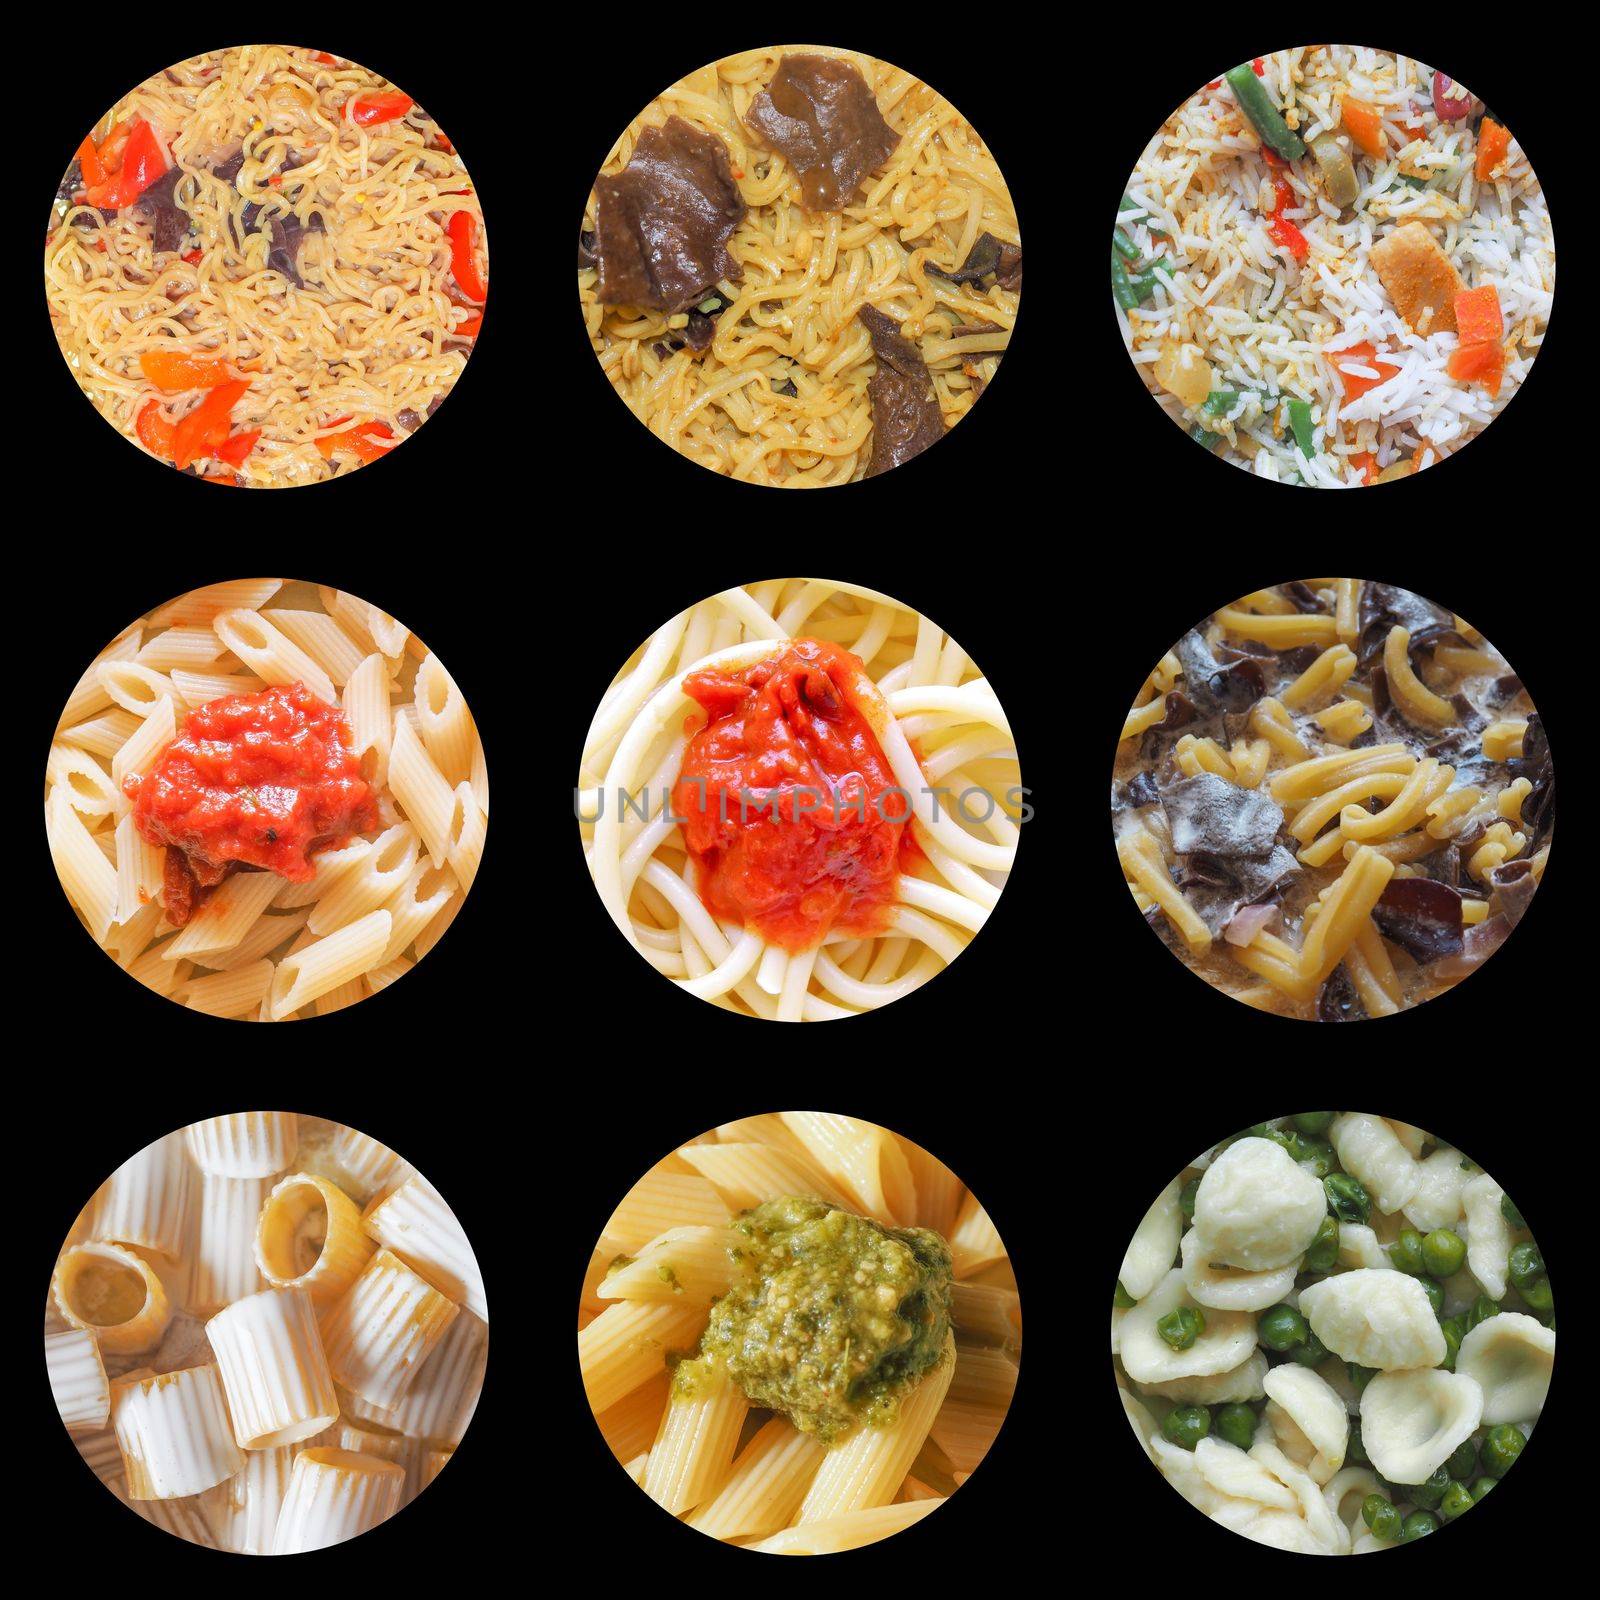 Collage of many different types of pasta including Asian curry noodes, rice salad, Italian penne and spaghetti al pomodoro, rigatoni with cream, penne al pesto and orecchiette with peas